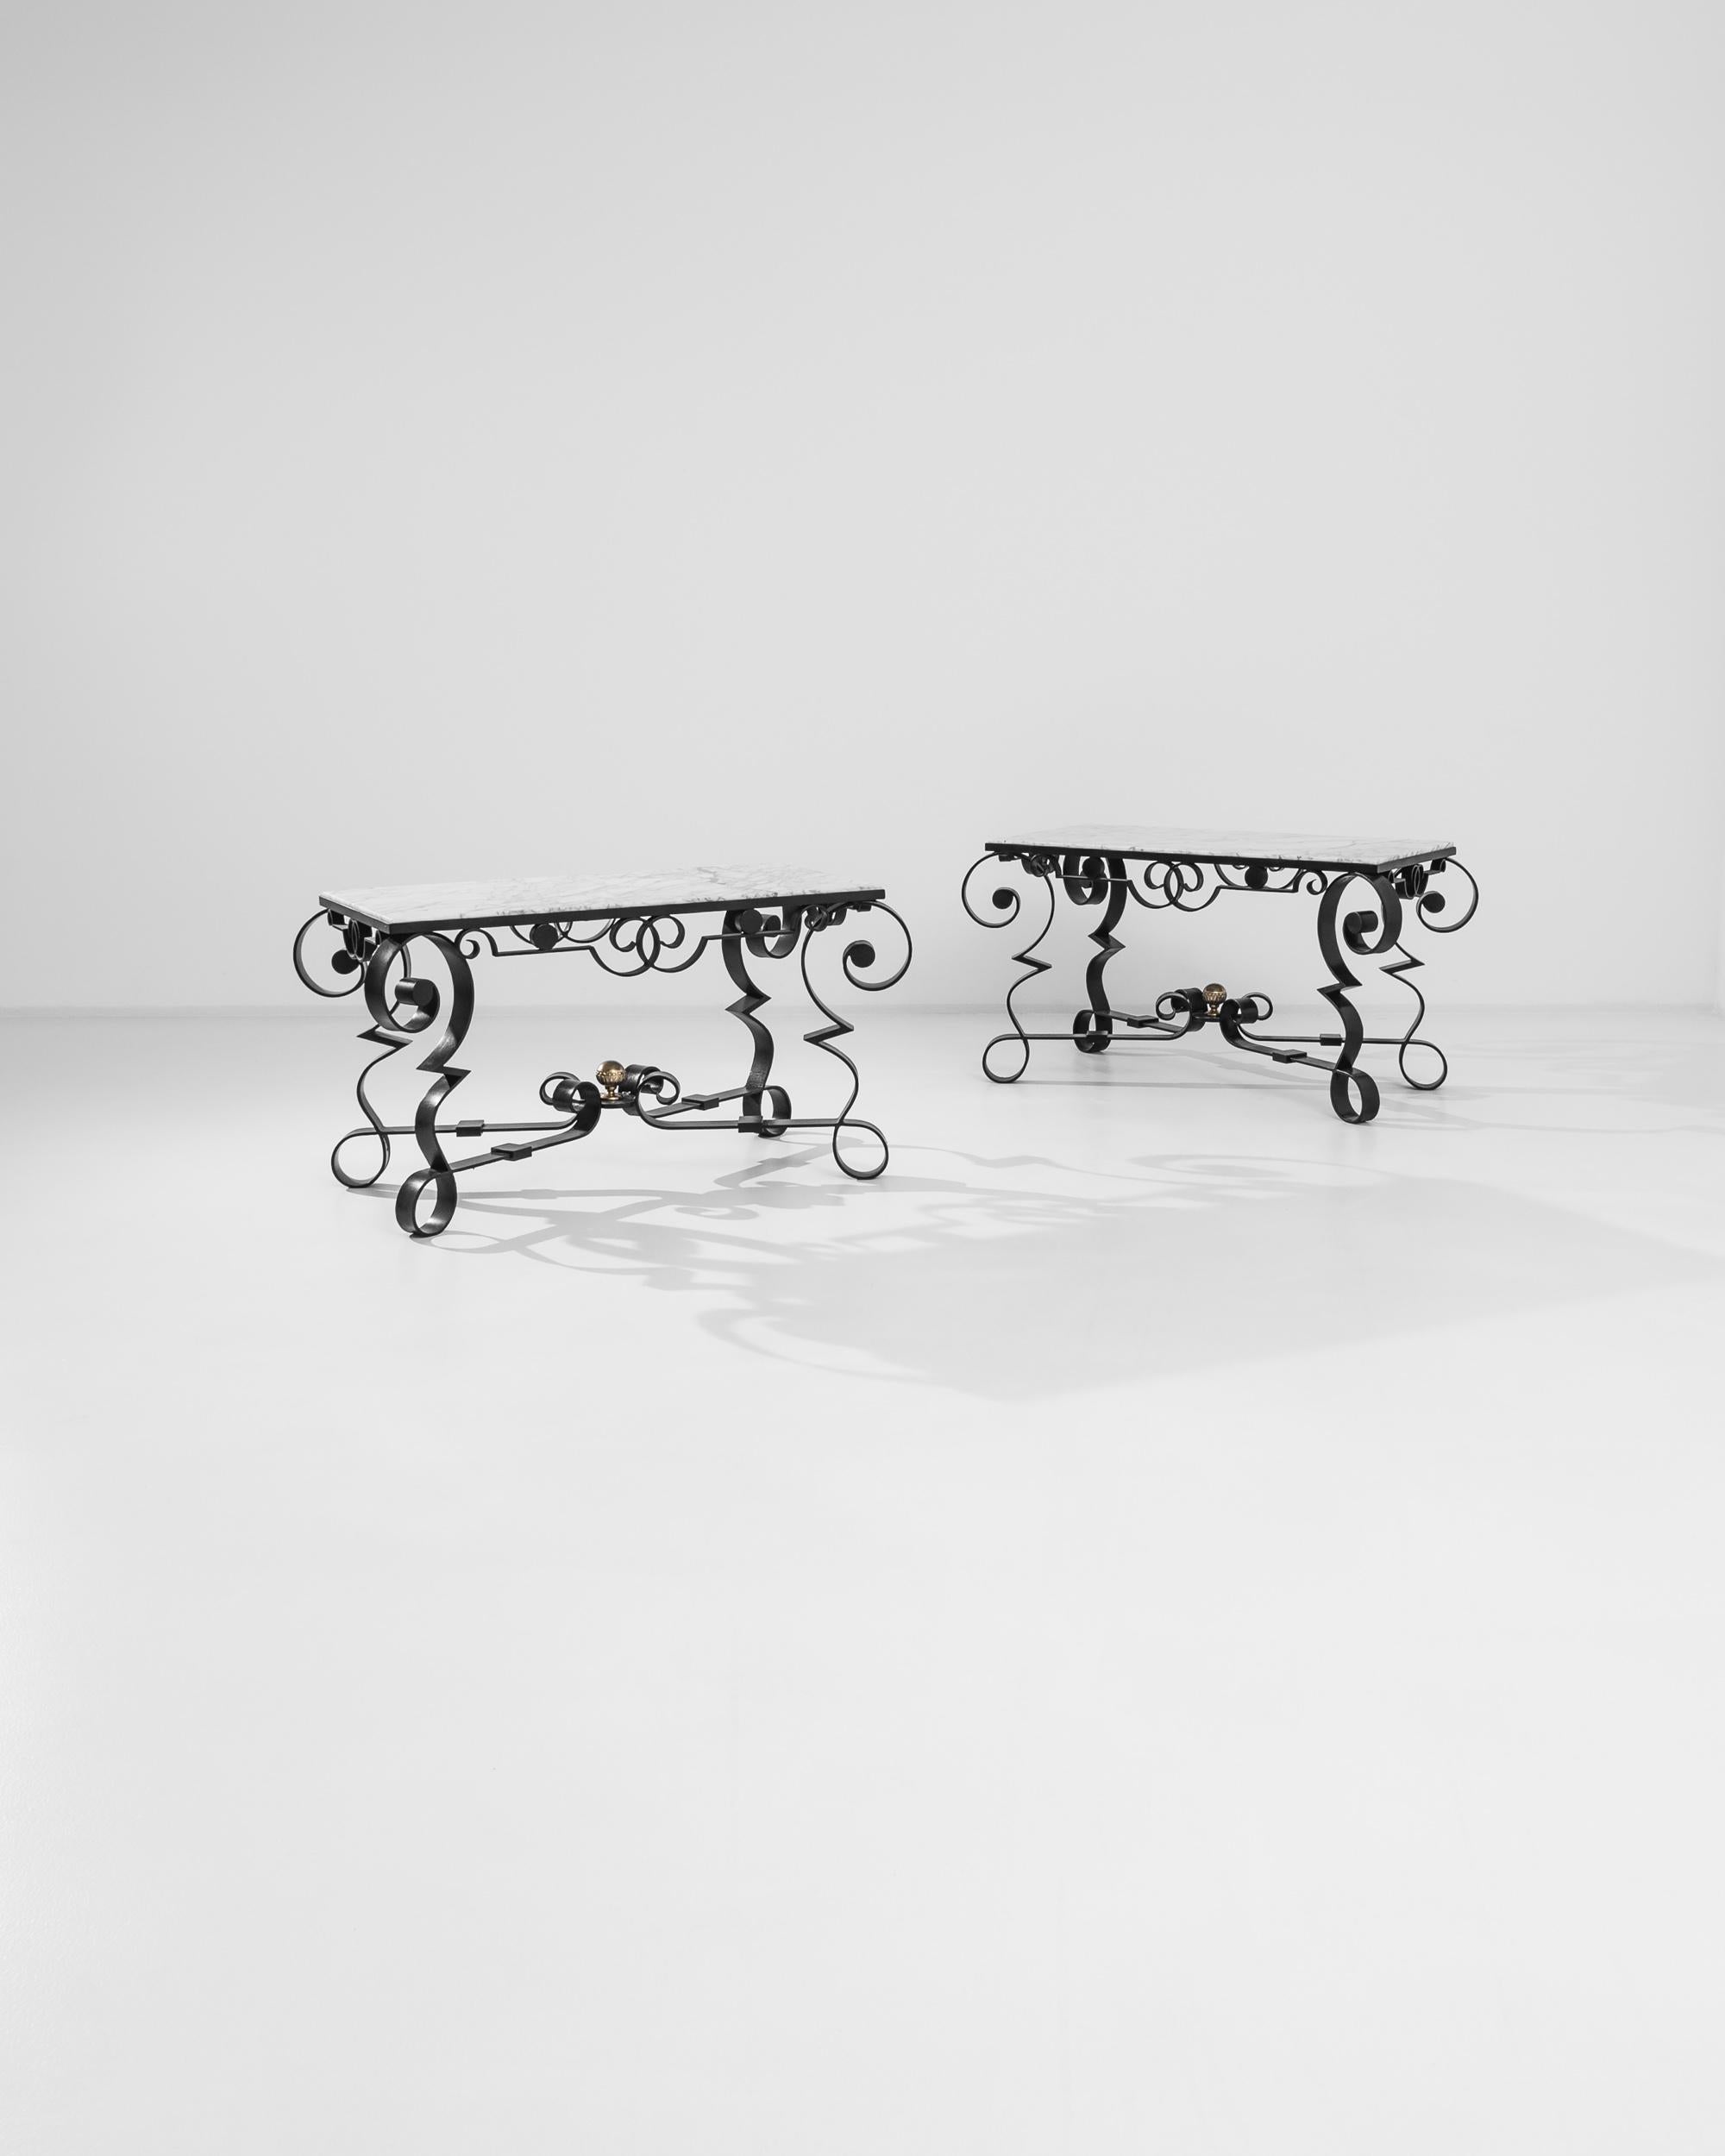 This pair of French tables was crafted, exquisitely, circa 1900. Their delicate gray marble tops rest over metal bases whose energetic swirls, twists and volutes create graceful silhouettes full of sensuous richness. An “X” shaped stretcher connects